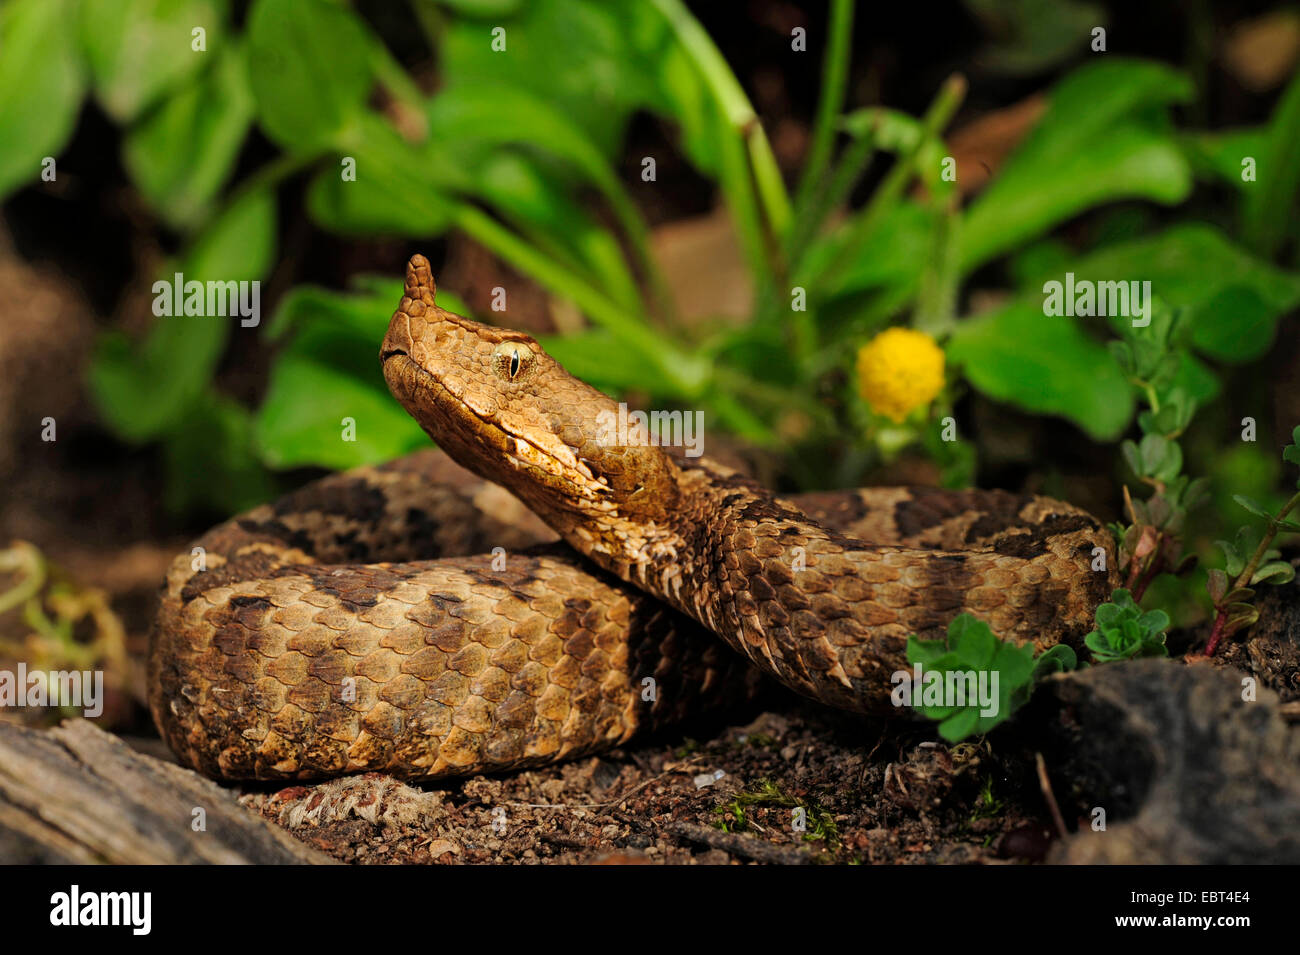 Nose-horned viper, Horned viper, Long-nosed viper (Vipera ammodytes, Vipera ammodytes meridionalis  ), closeup on soil ground among different flowers, Greece, Macedonia Stock Photo